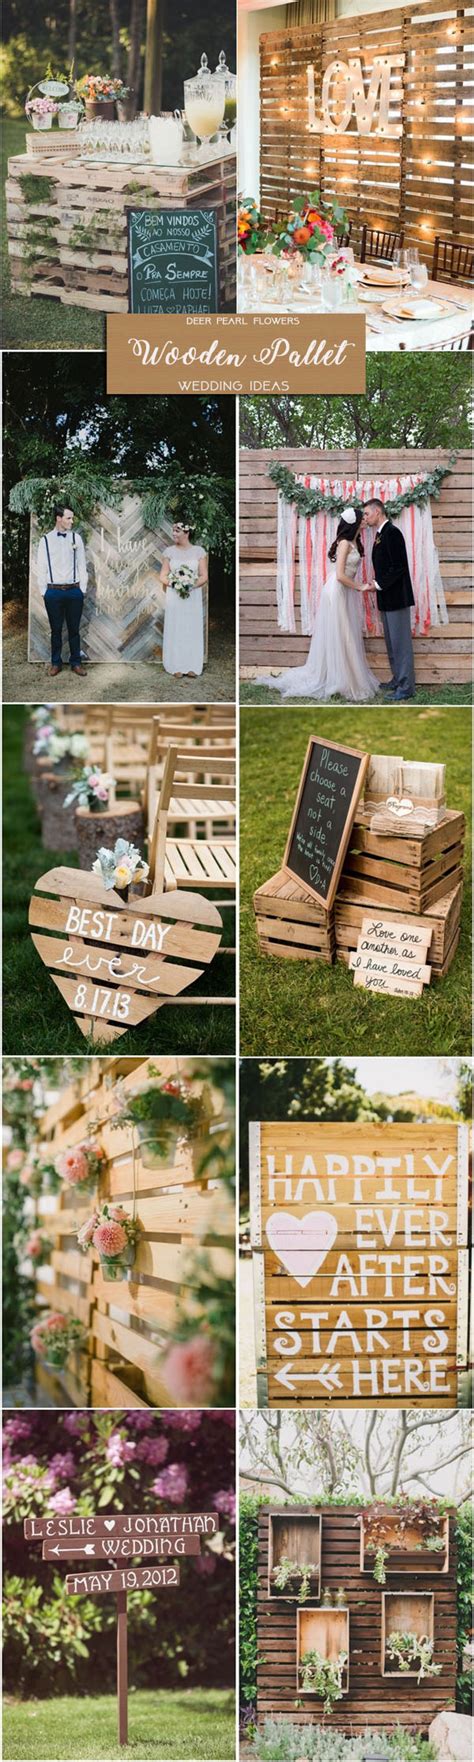 Top 14 Rustic Wedding Themes And Ideas For 2021 Part Ii Deer Pearl Flowers